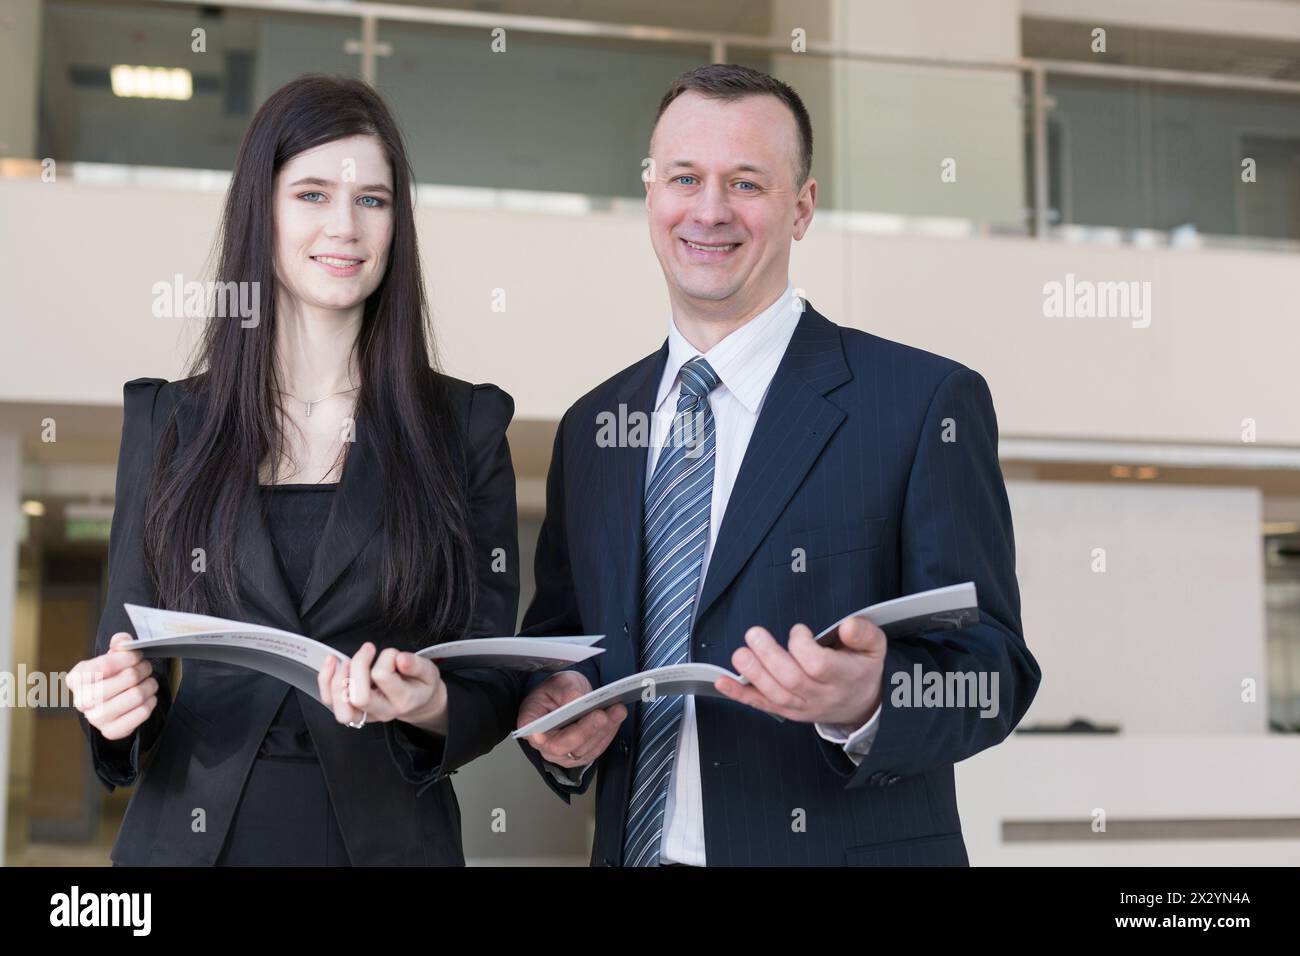 Business man and woman are holding magazines Stock Photo